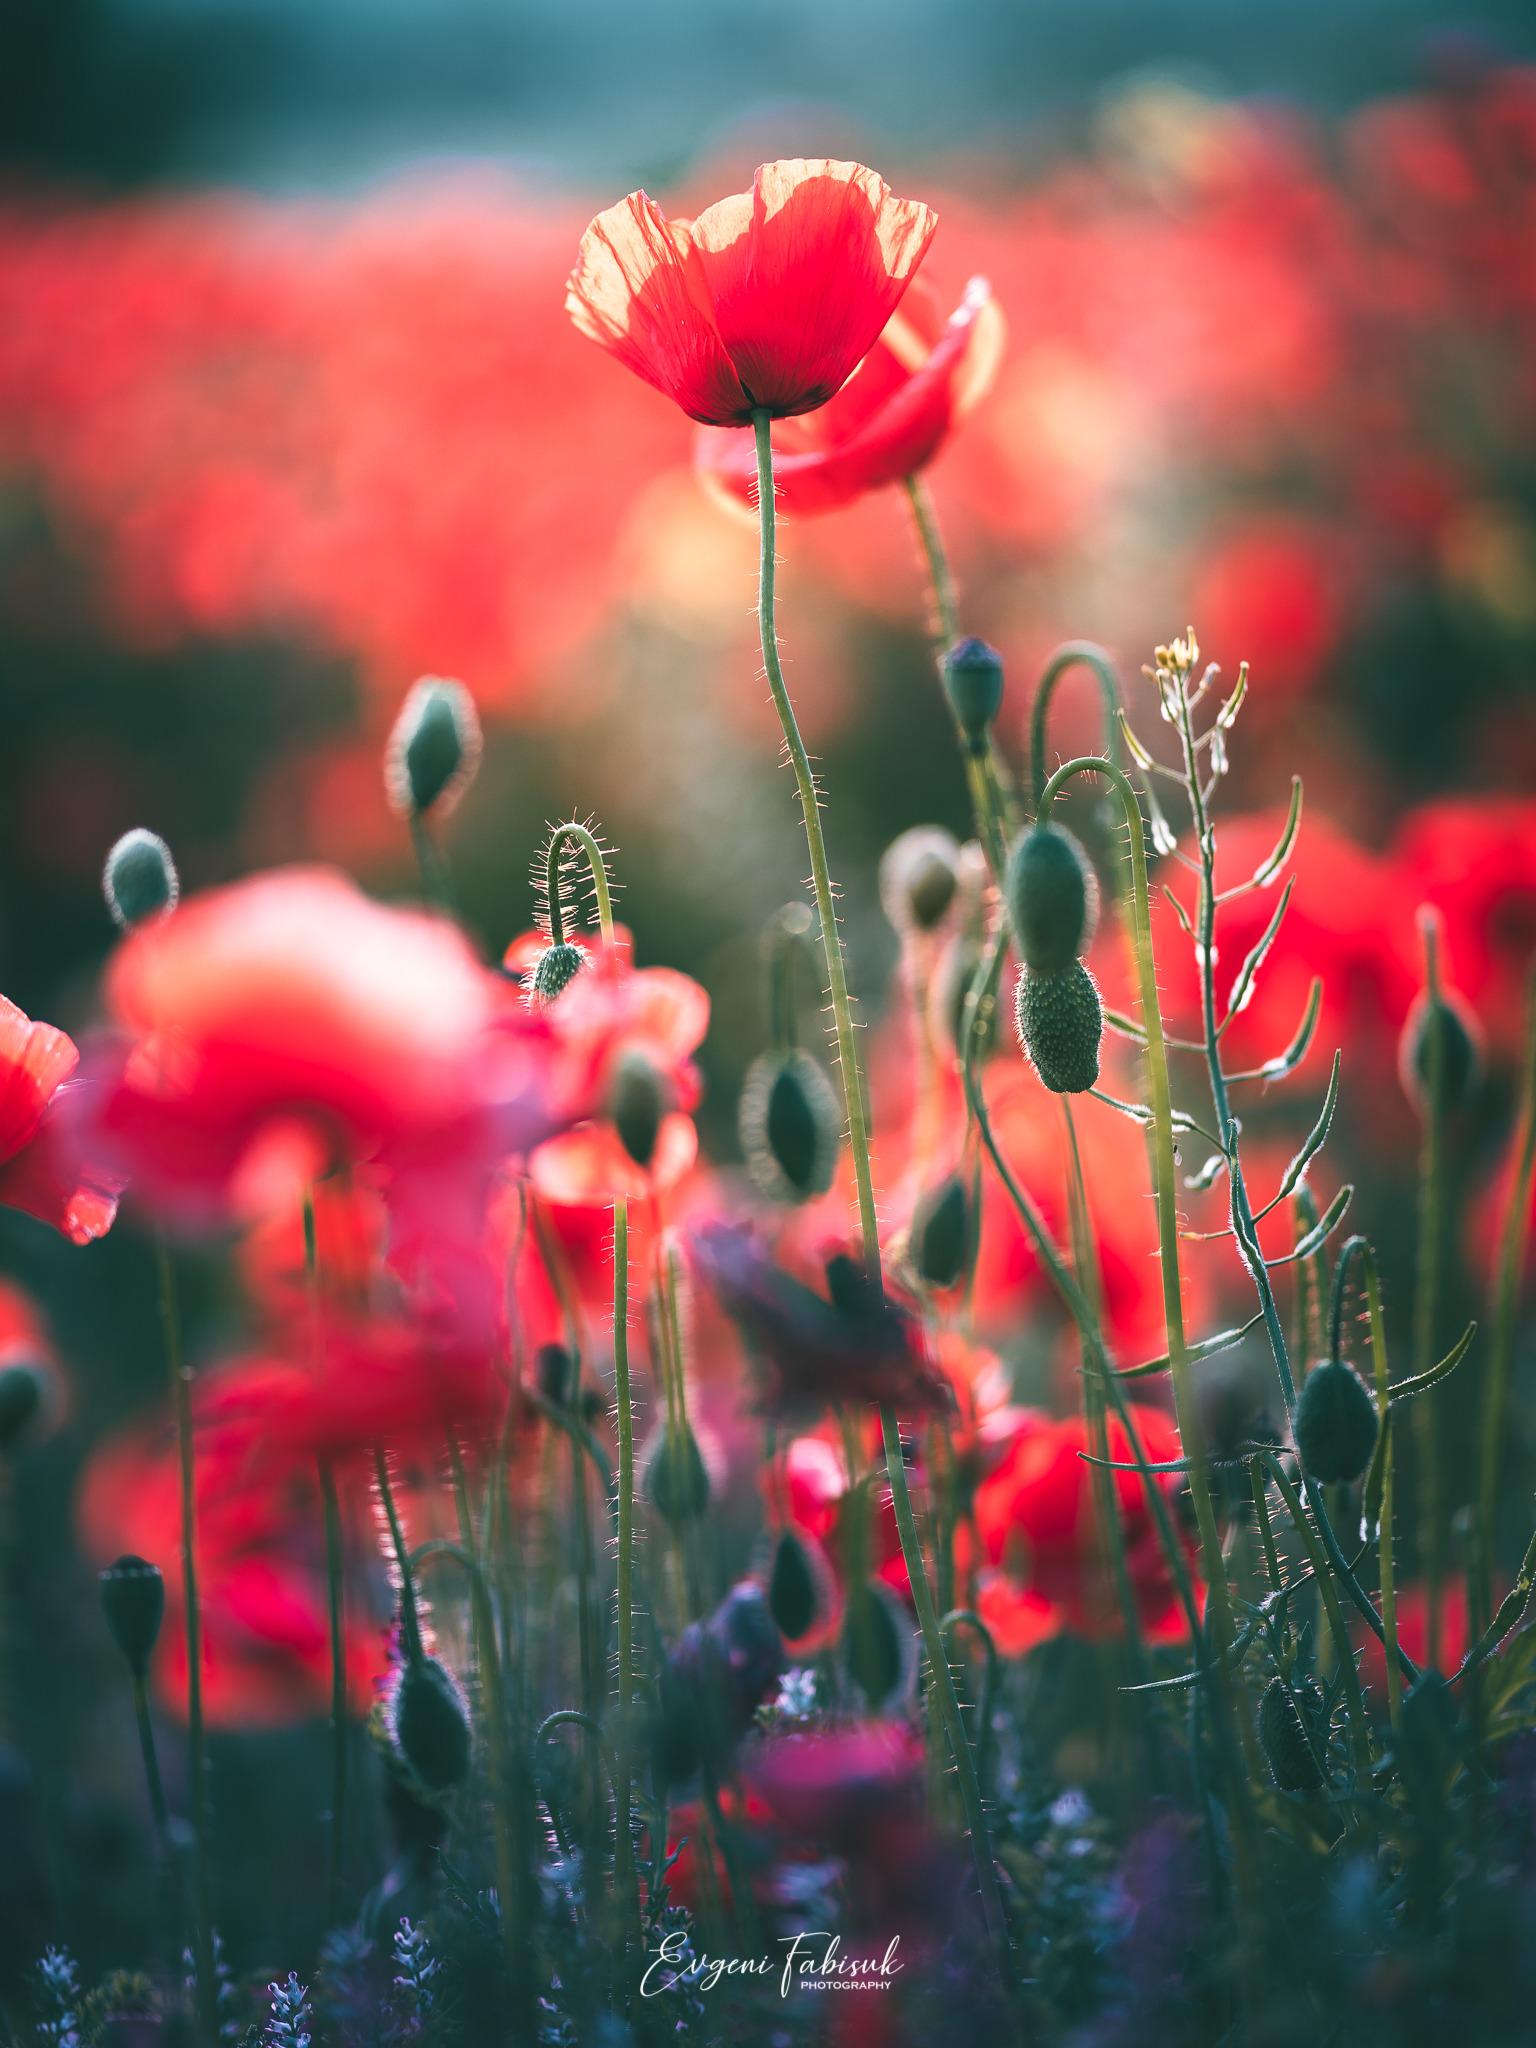 HD wallpaper, Evgeni Fabisuk, Leaves, Nature, Grass, Red, Field, Landscape, Green, Photography, Poppies, Flowers, Plants